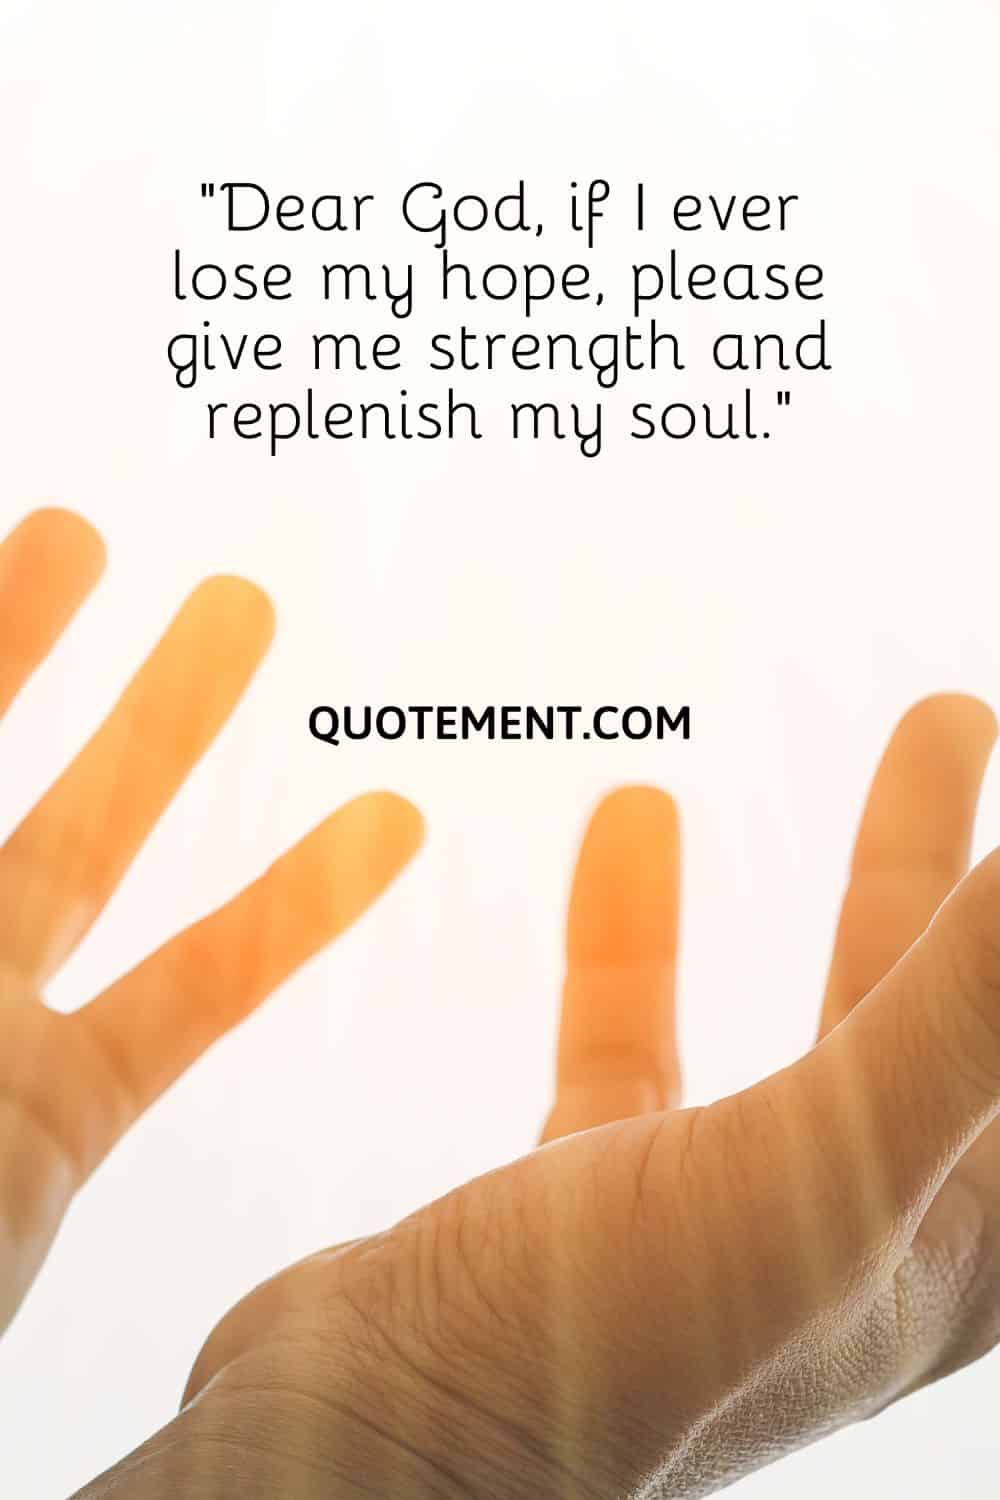 “Dear God, if I ever lose my hope, please give me strength and replenish my soul.”